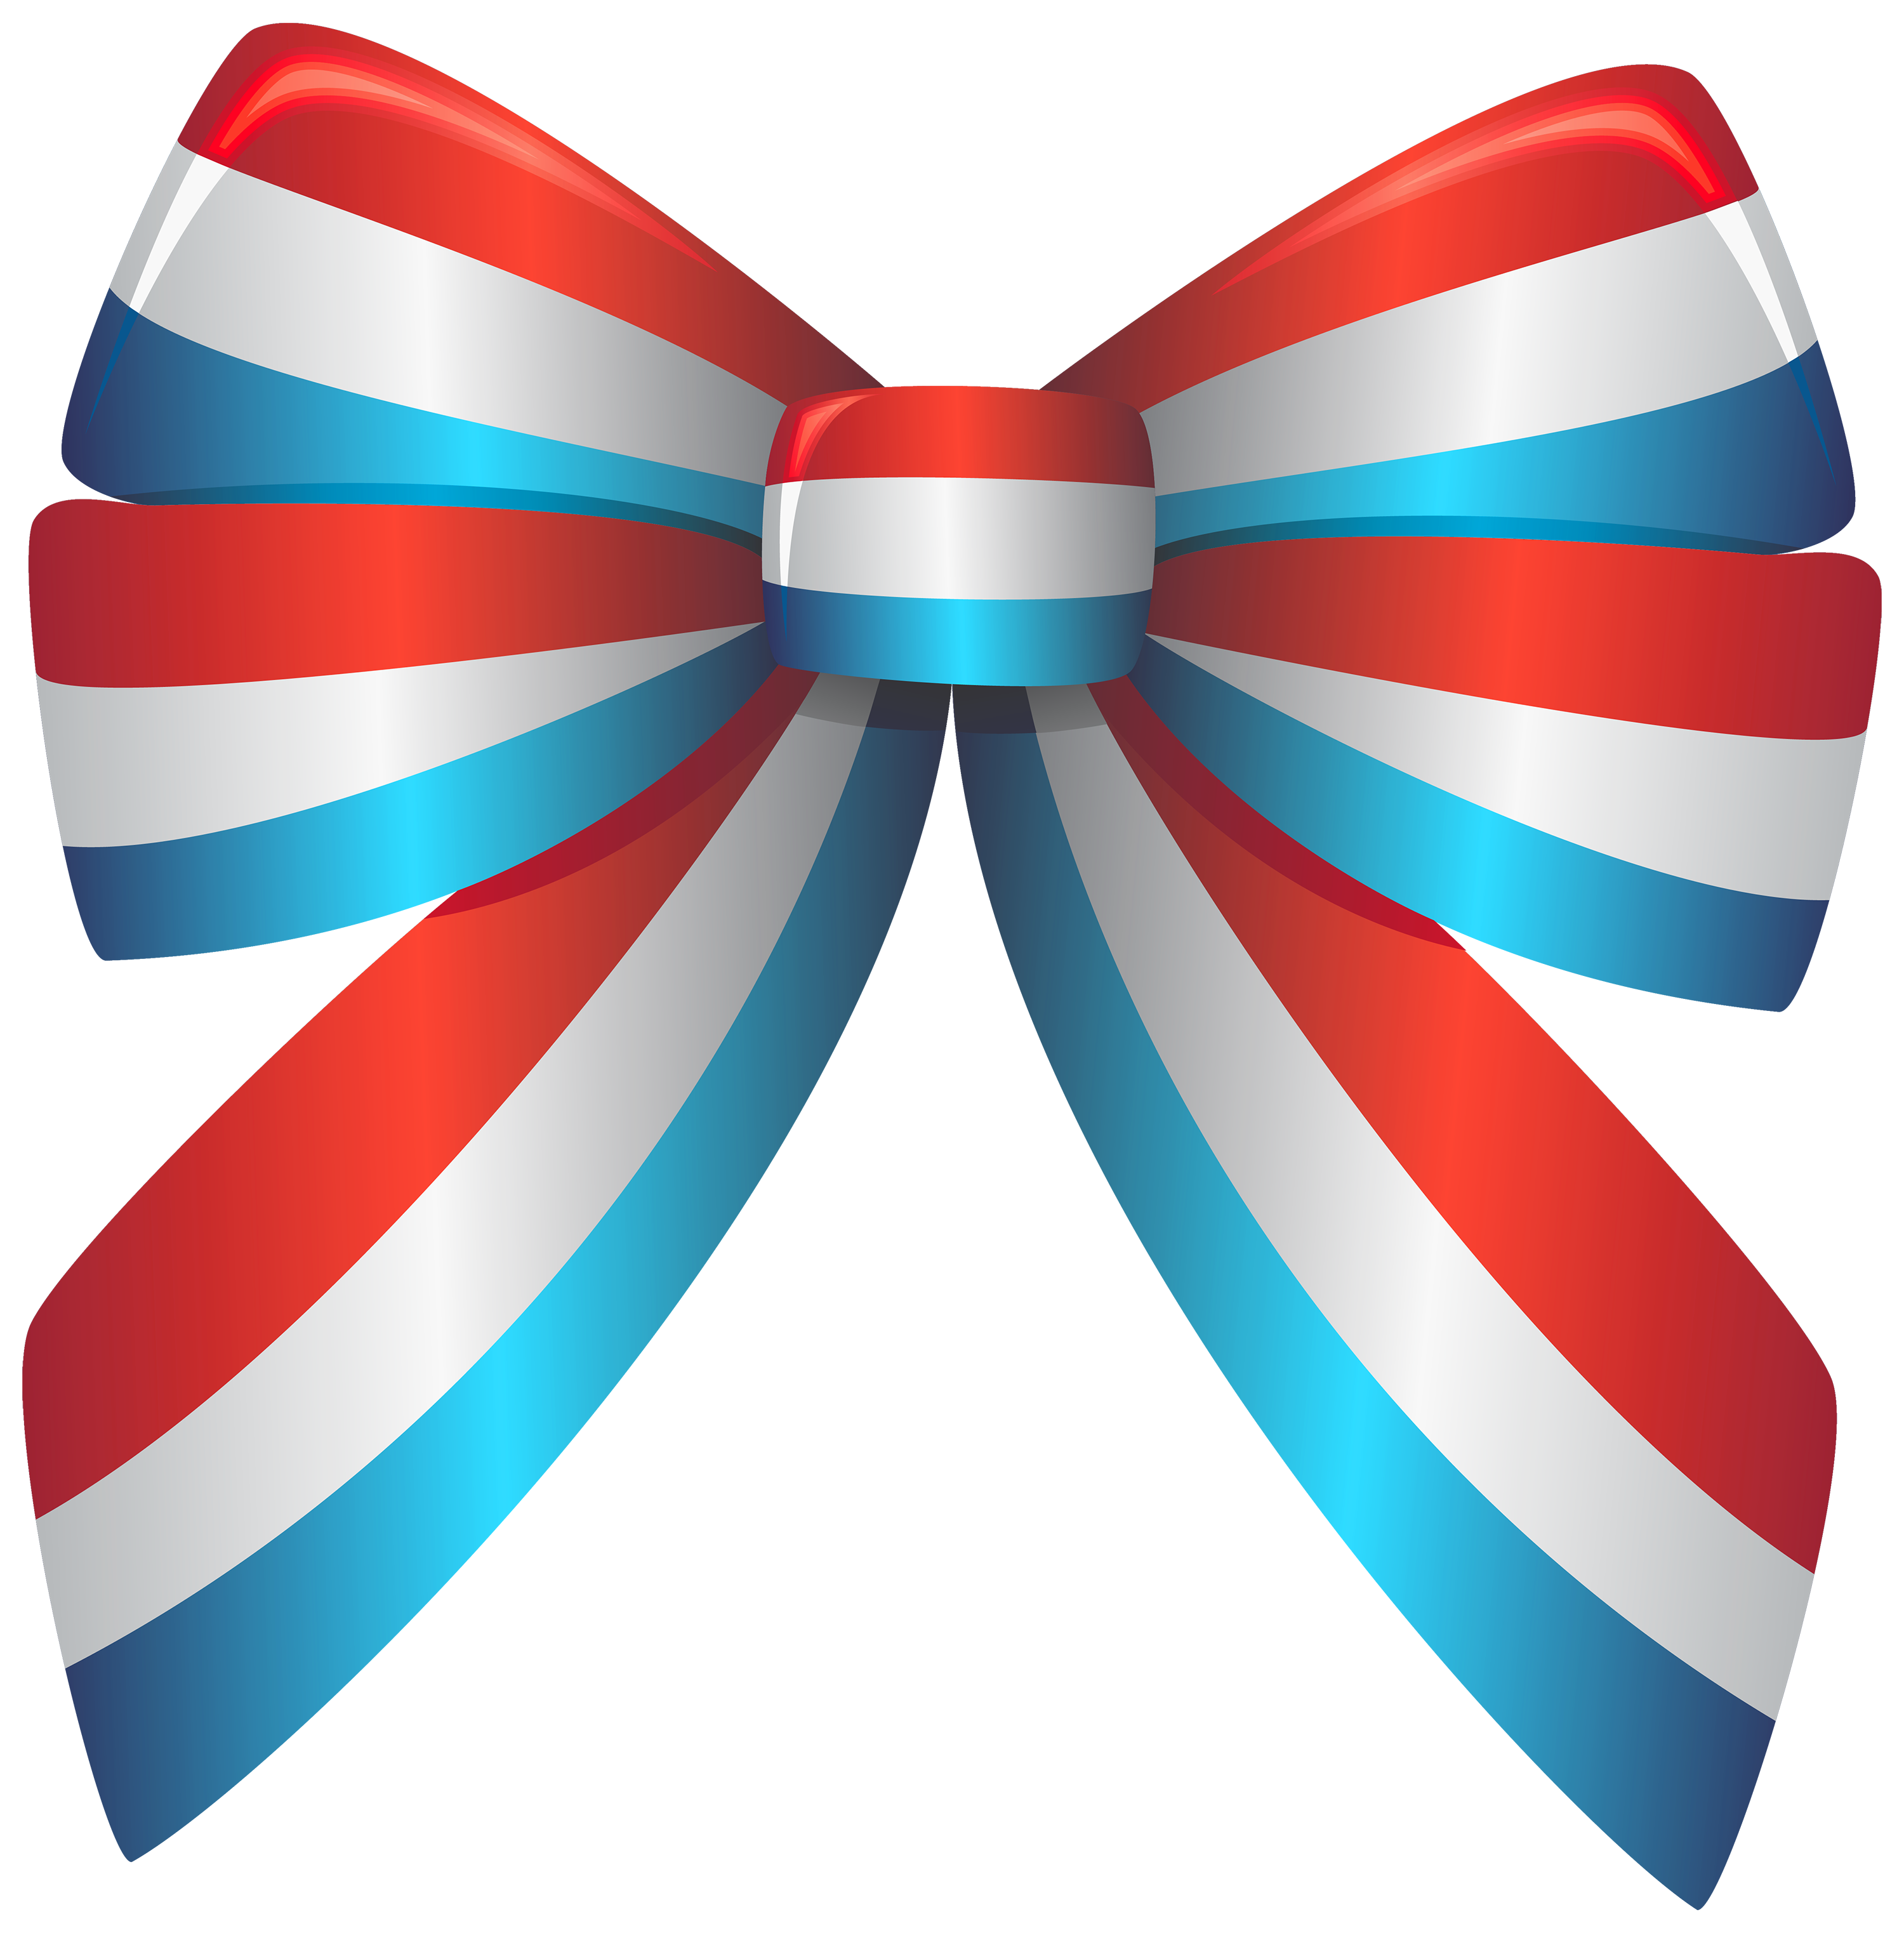 Red white and blue ribbon clipart.